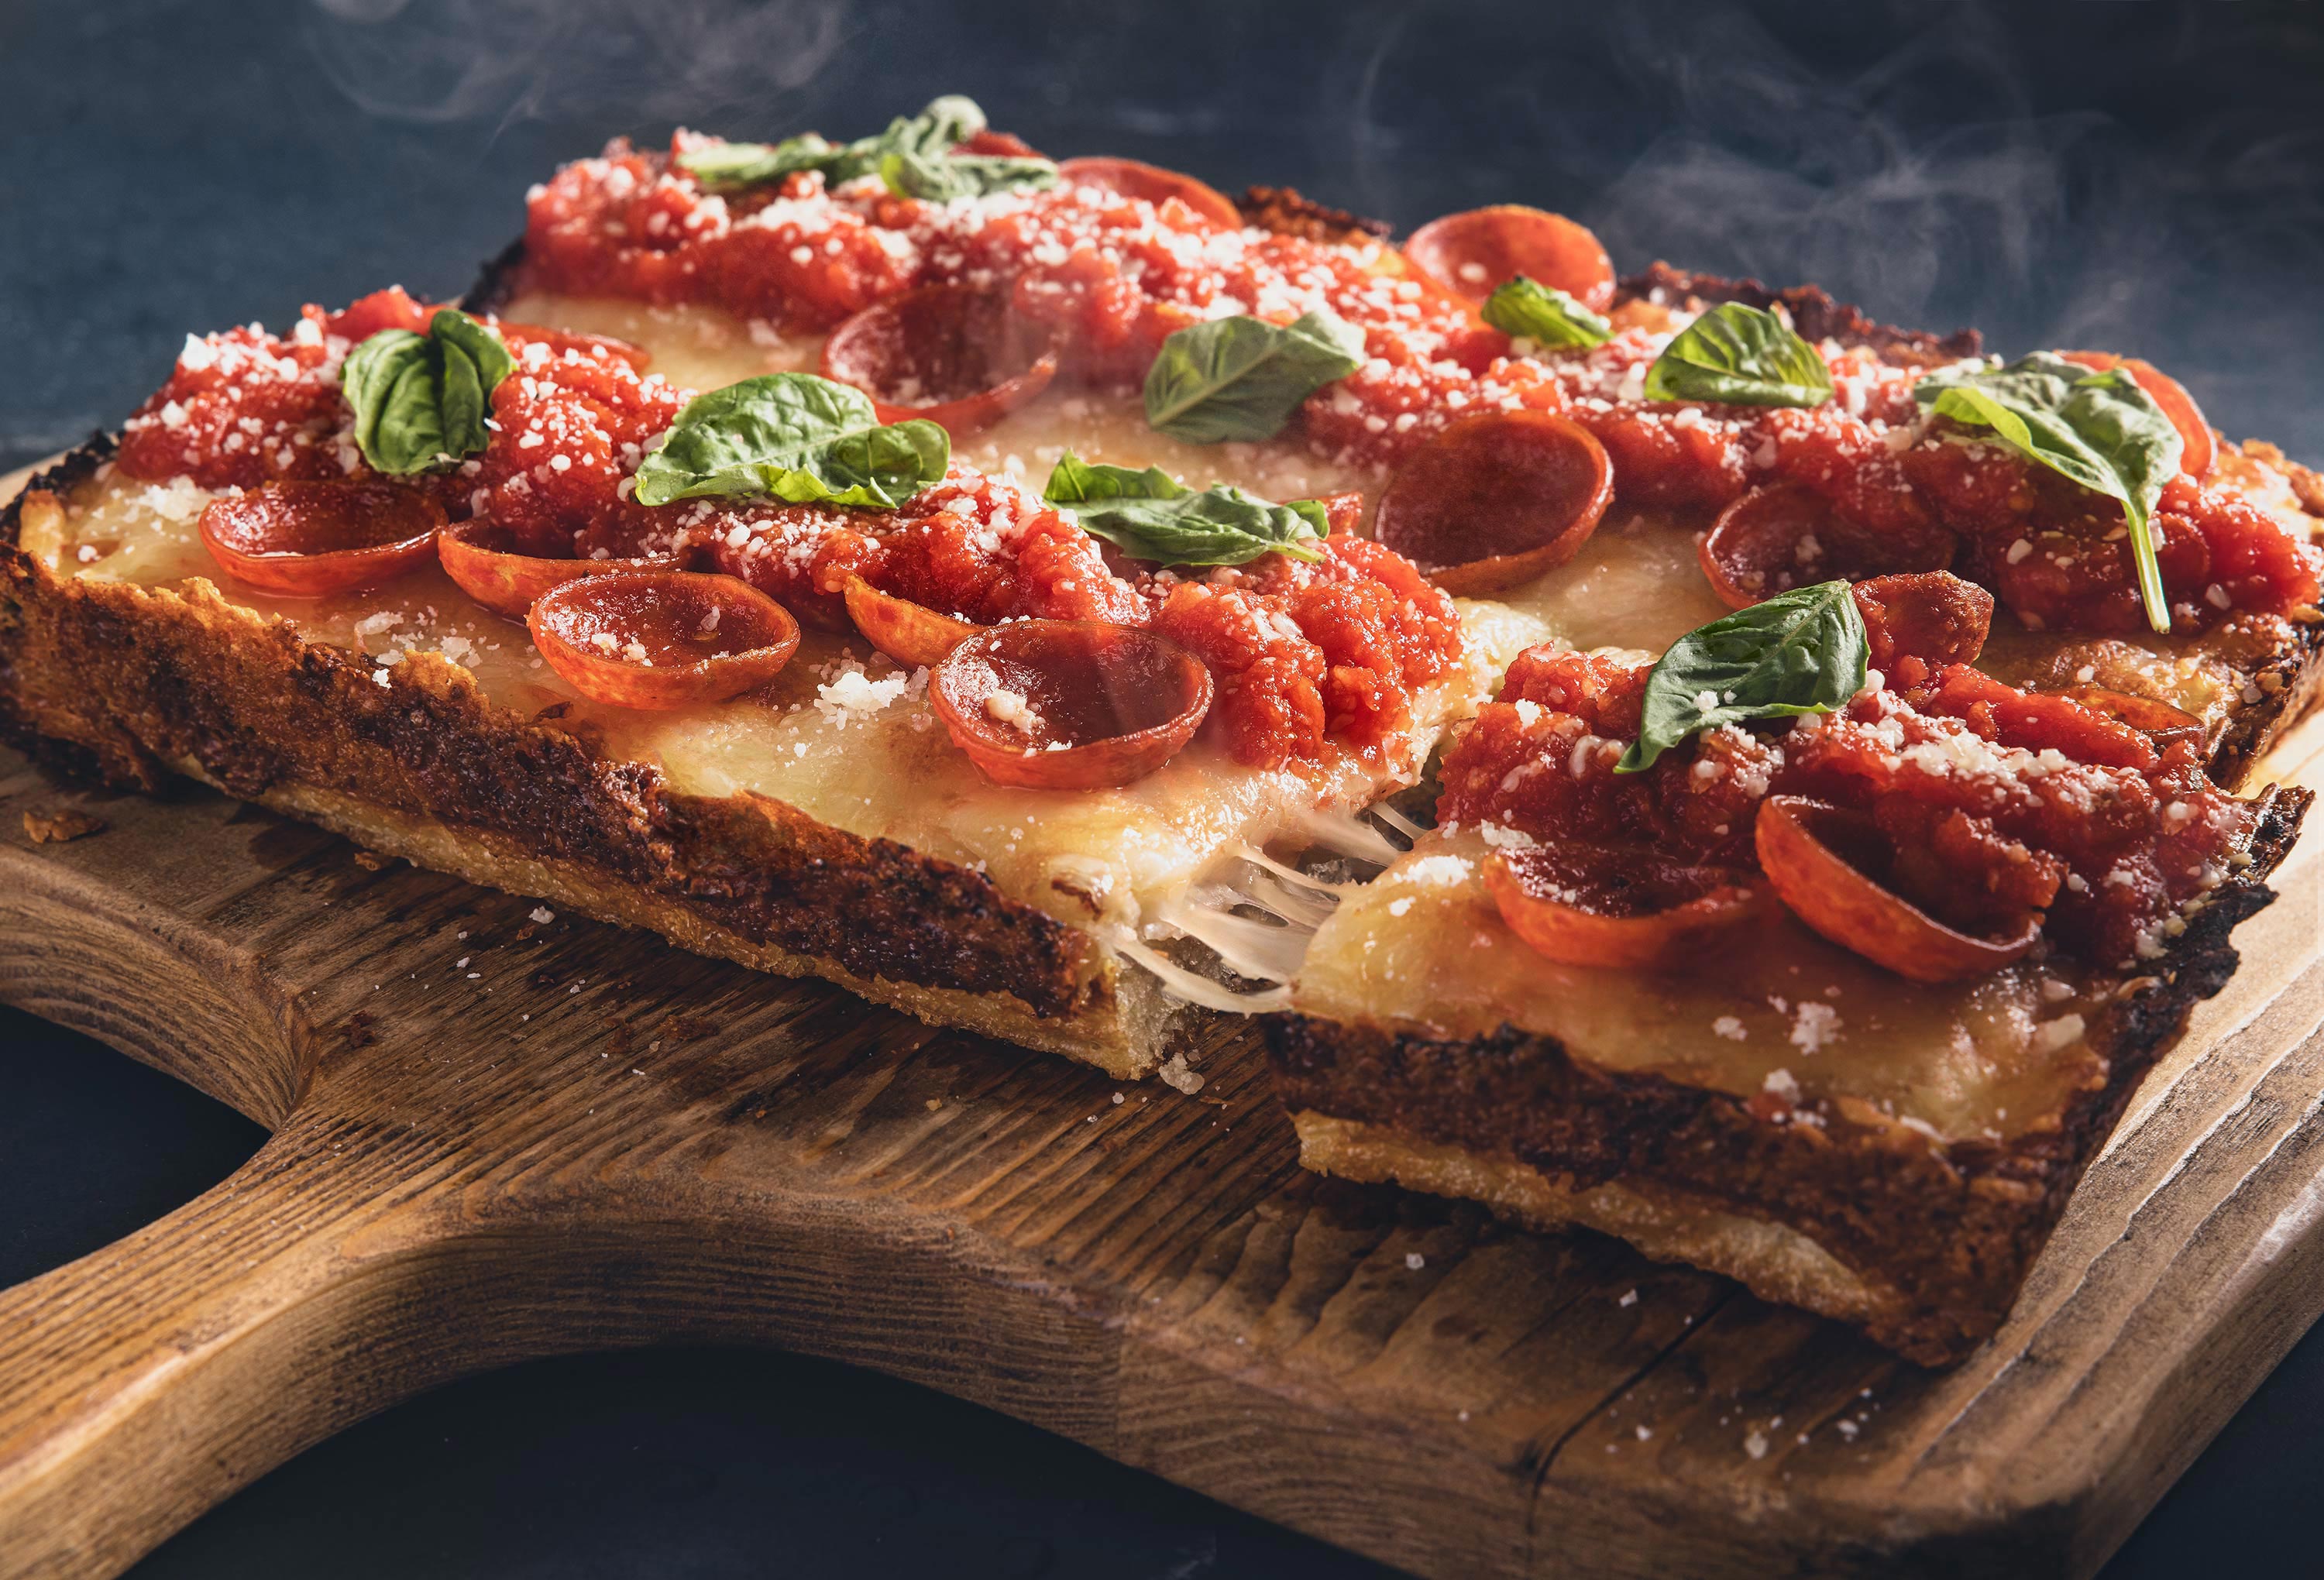 Glanger Photography | Deep dish rectangular pepperoni pizza with basil and one slice being taken out showing a cheese pull.  Pizza sits on a rustic paddle style cutting board